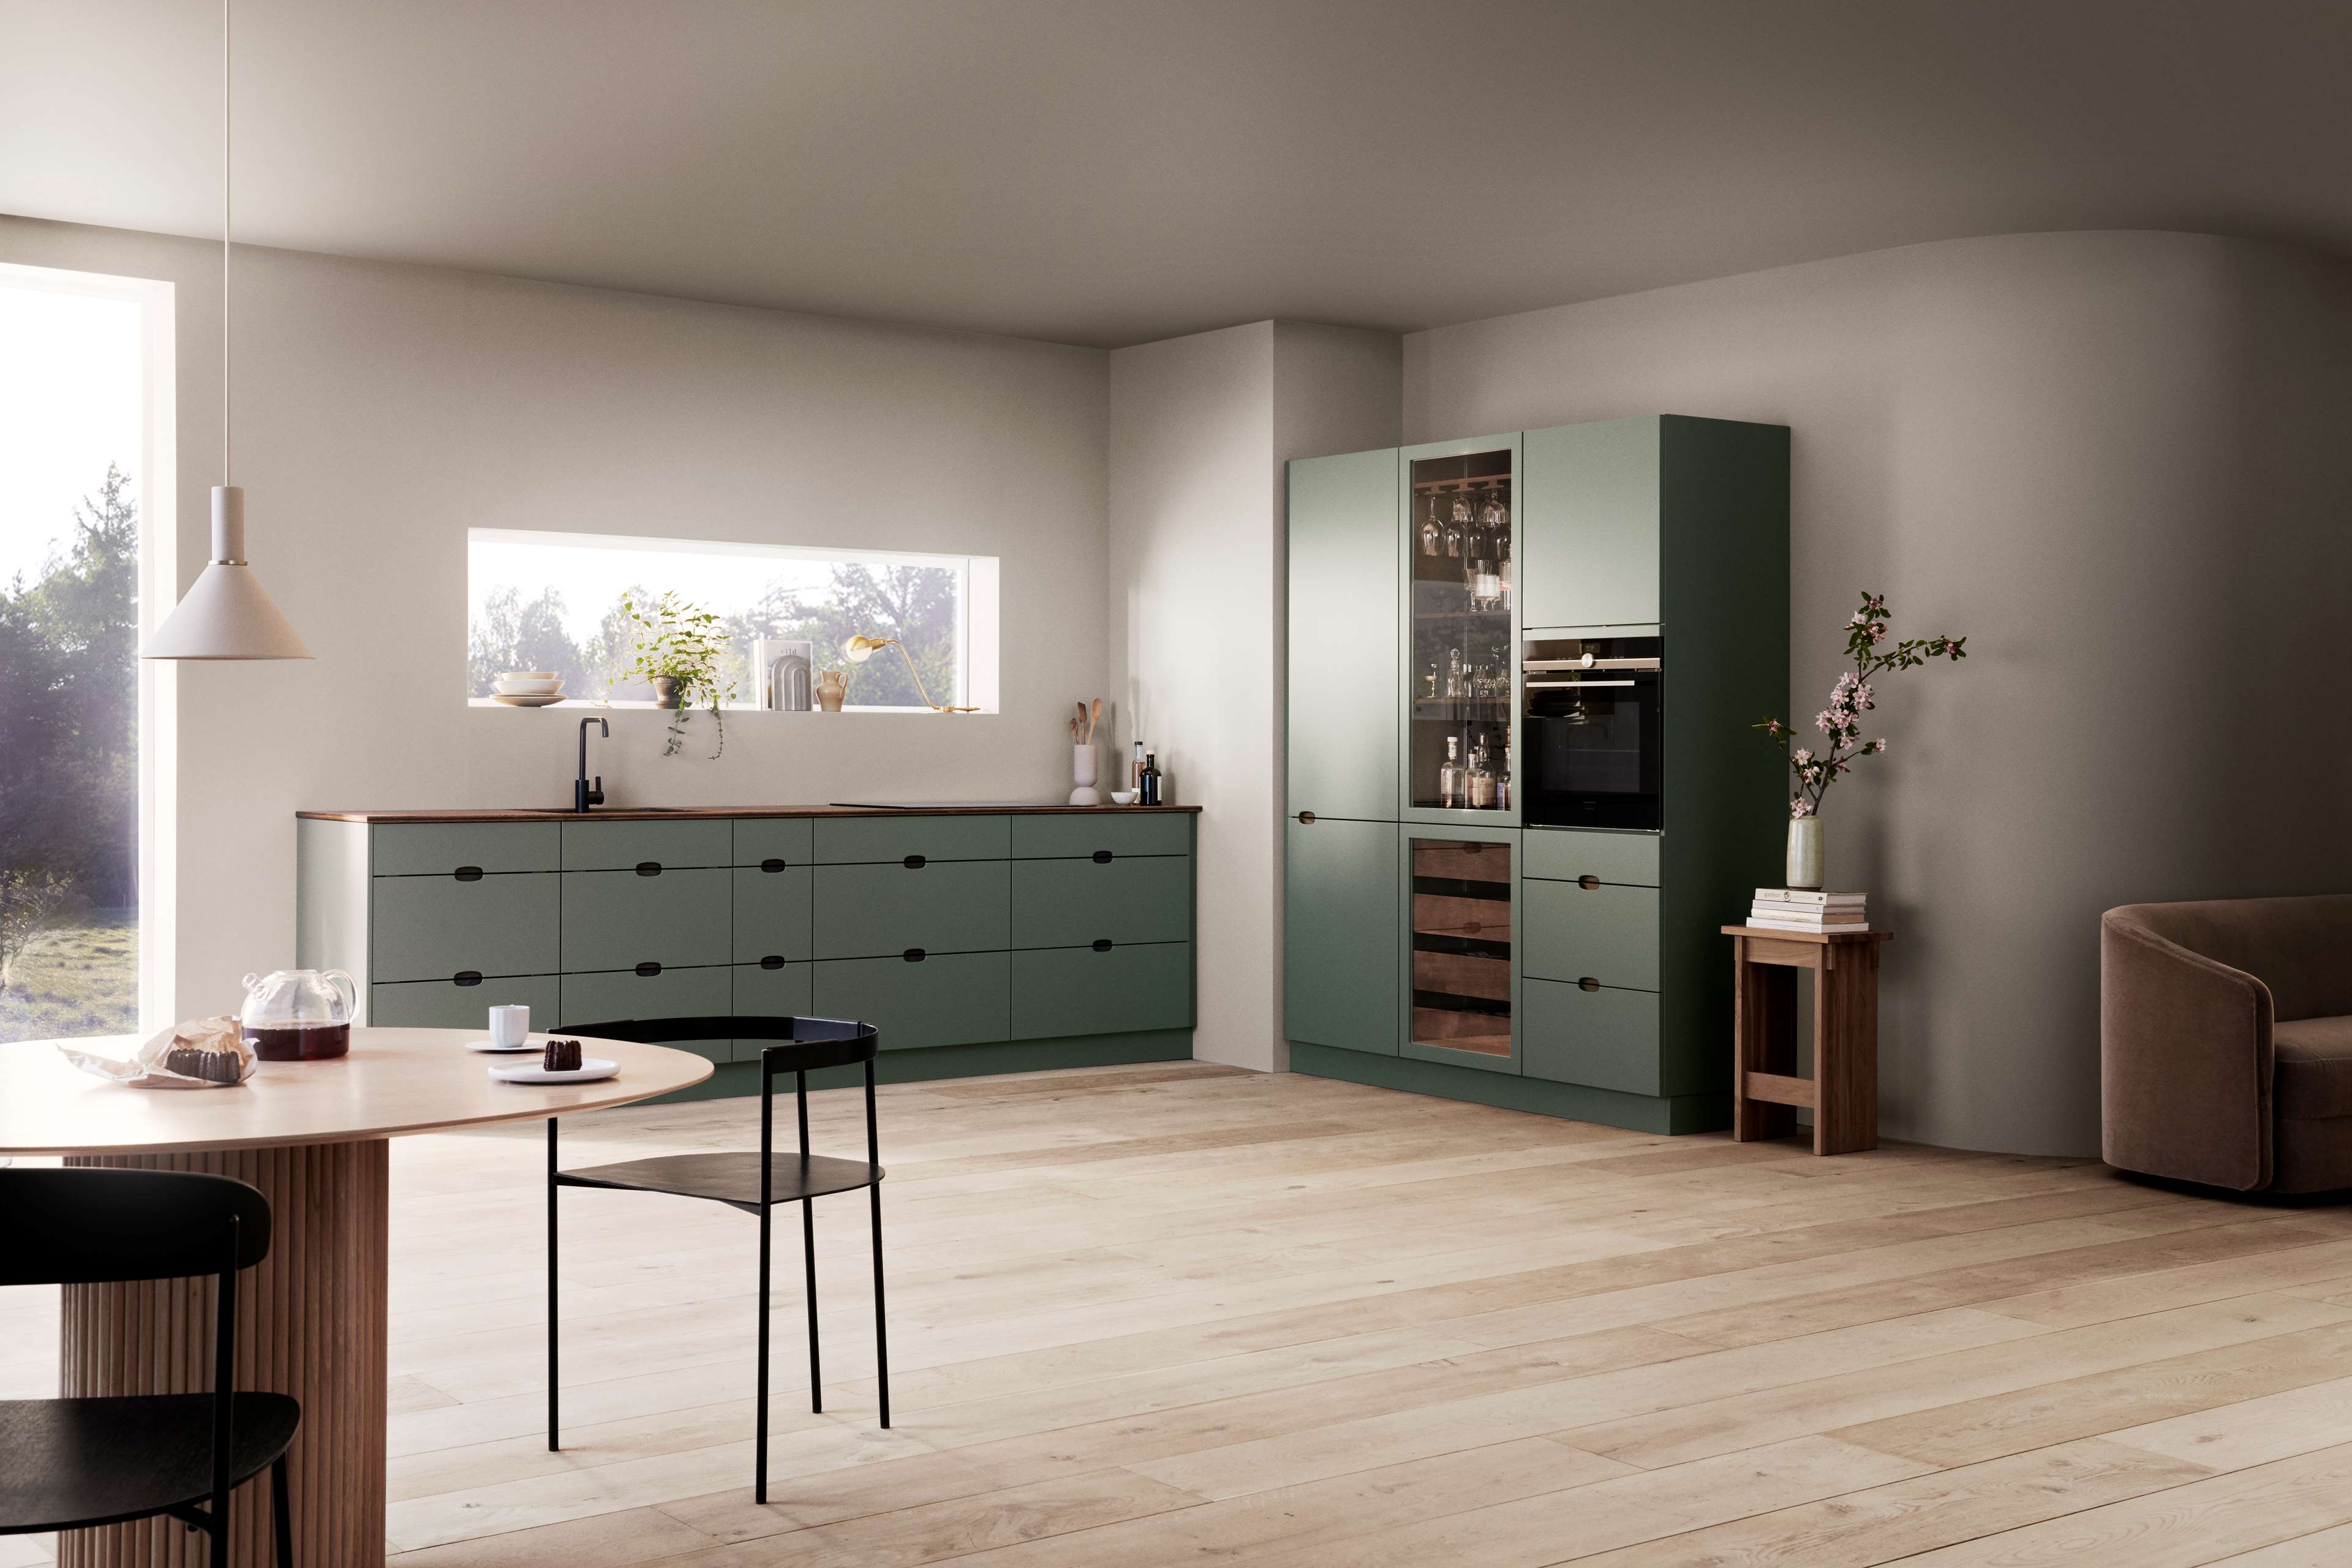 Green kitchen with a wine refrigerator and a wooden worktop